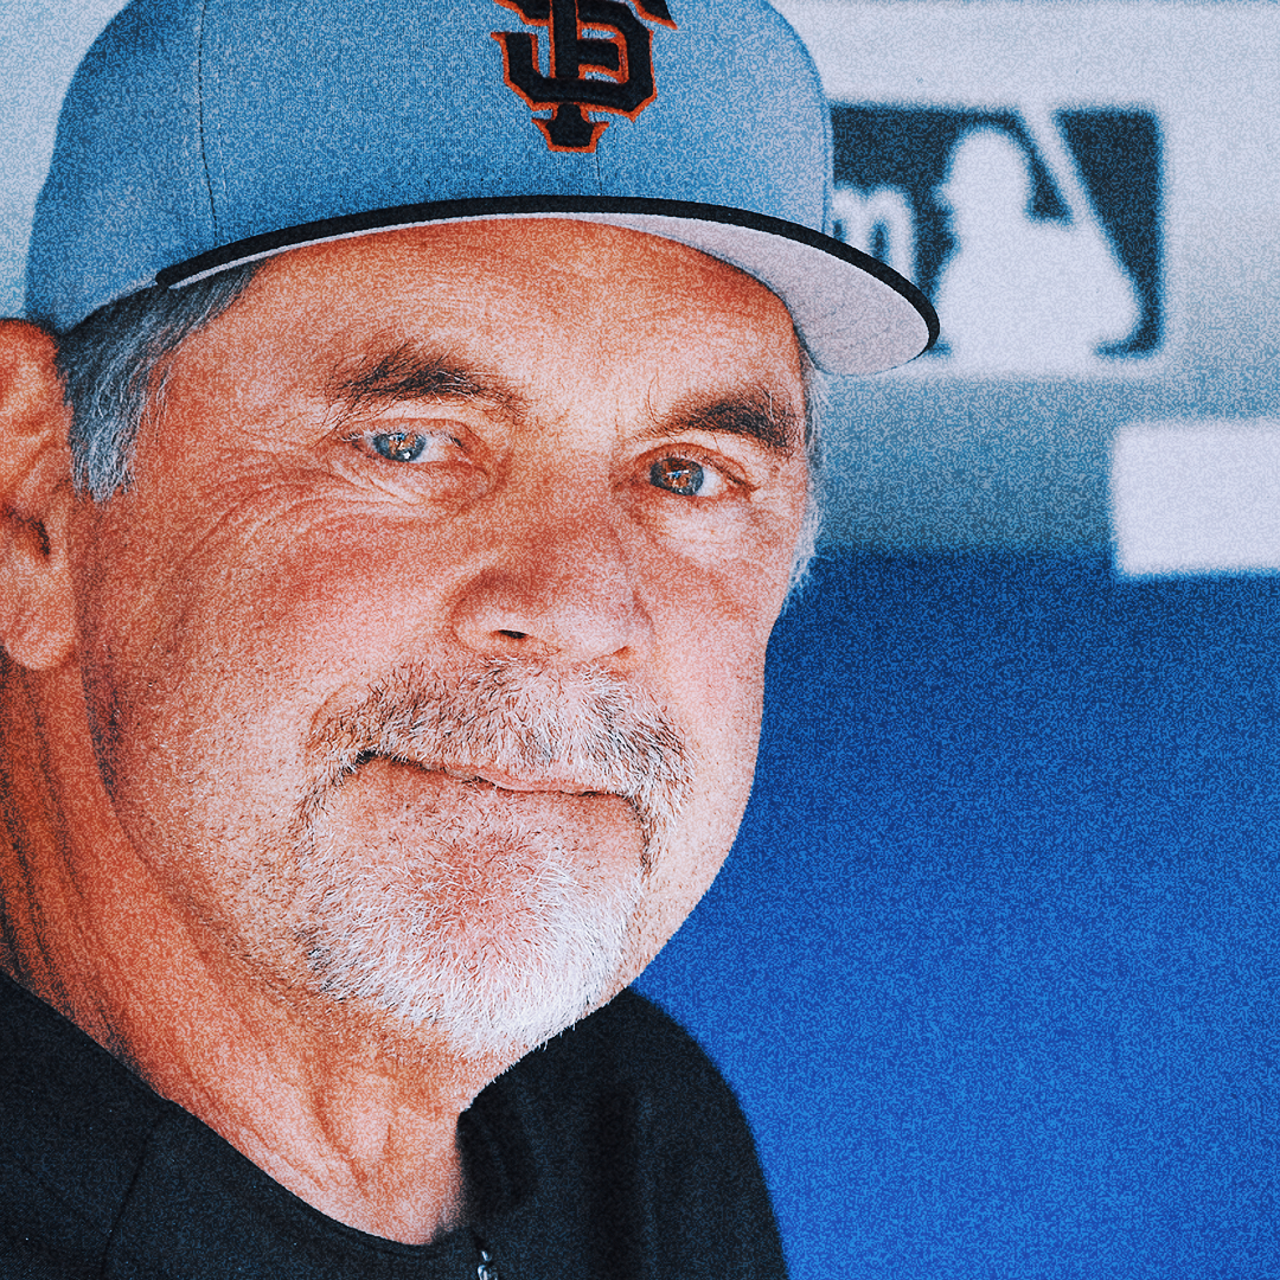 Texas Rangers hire Bruce Bochy as manager